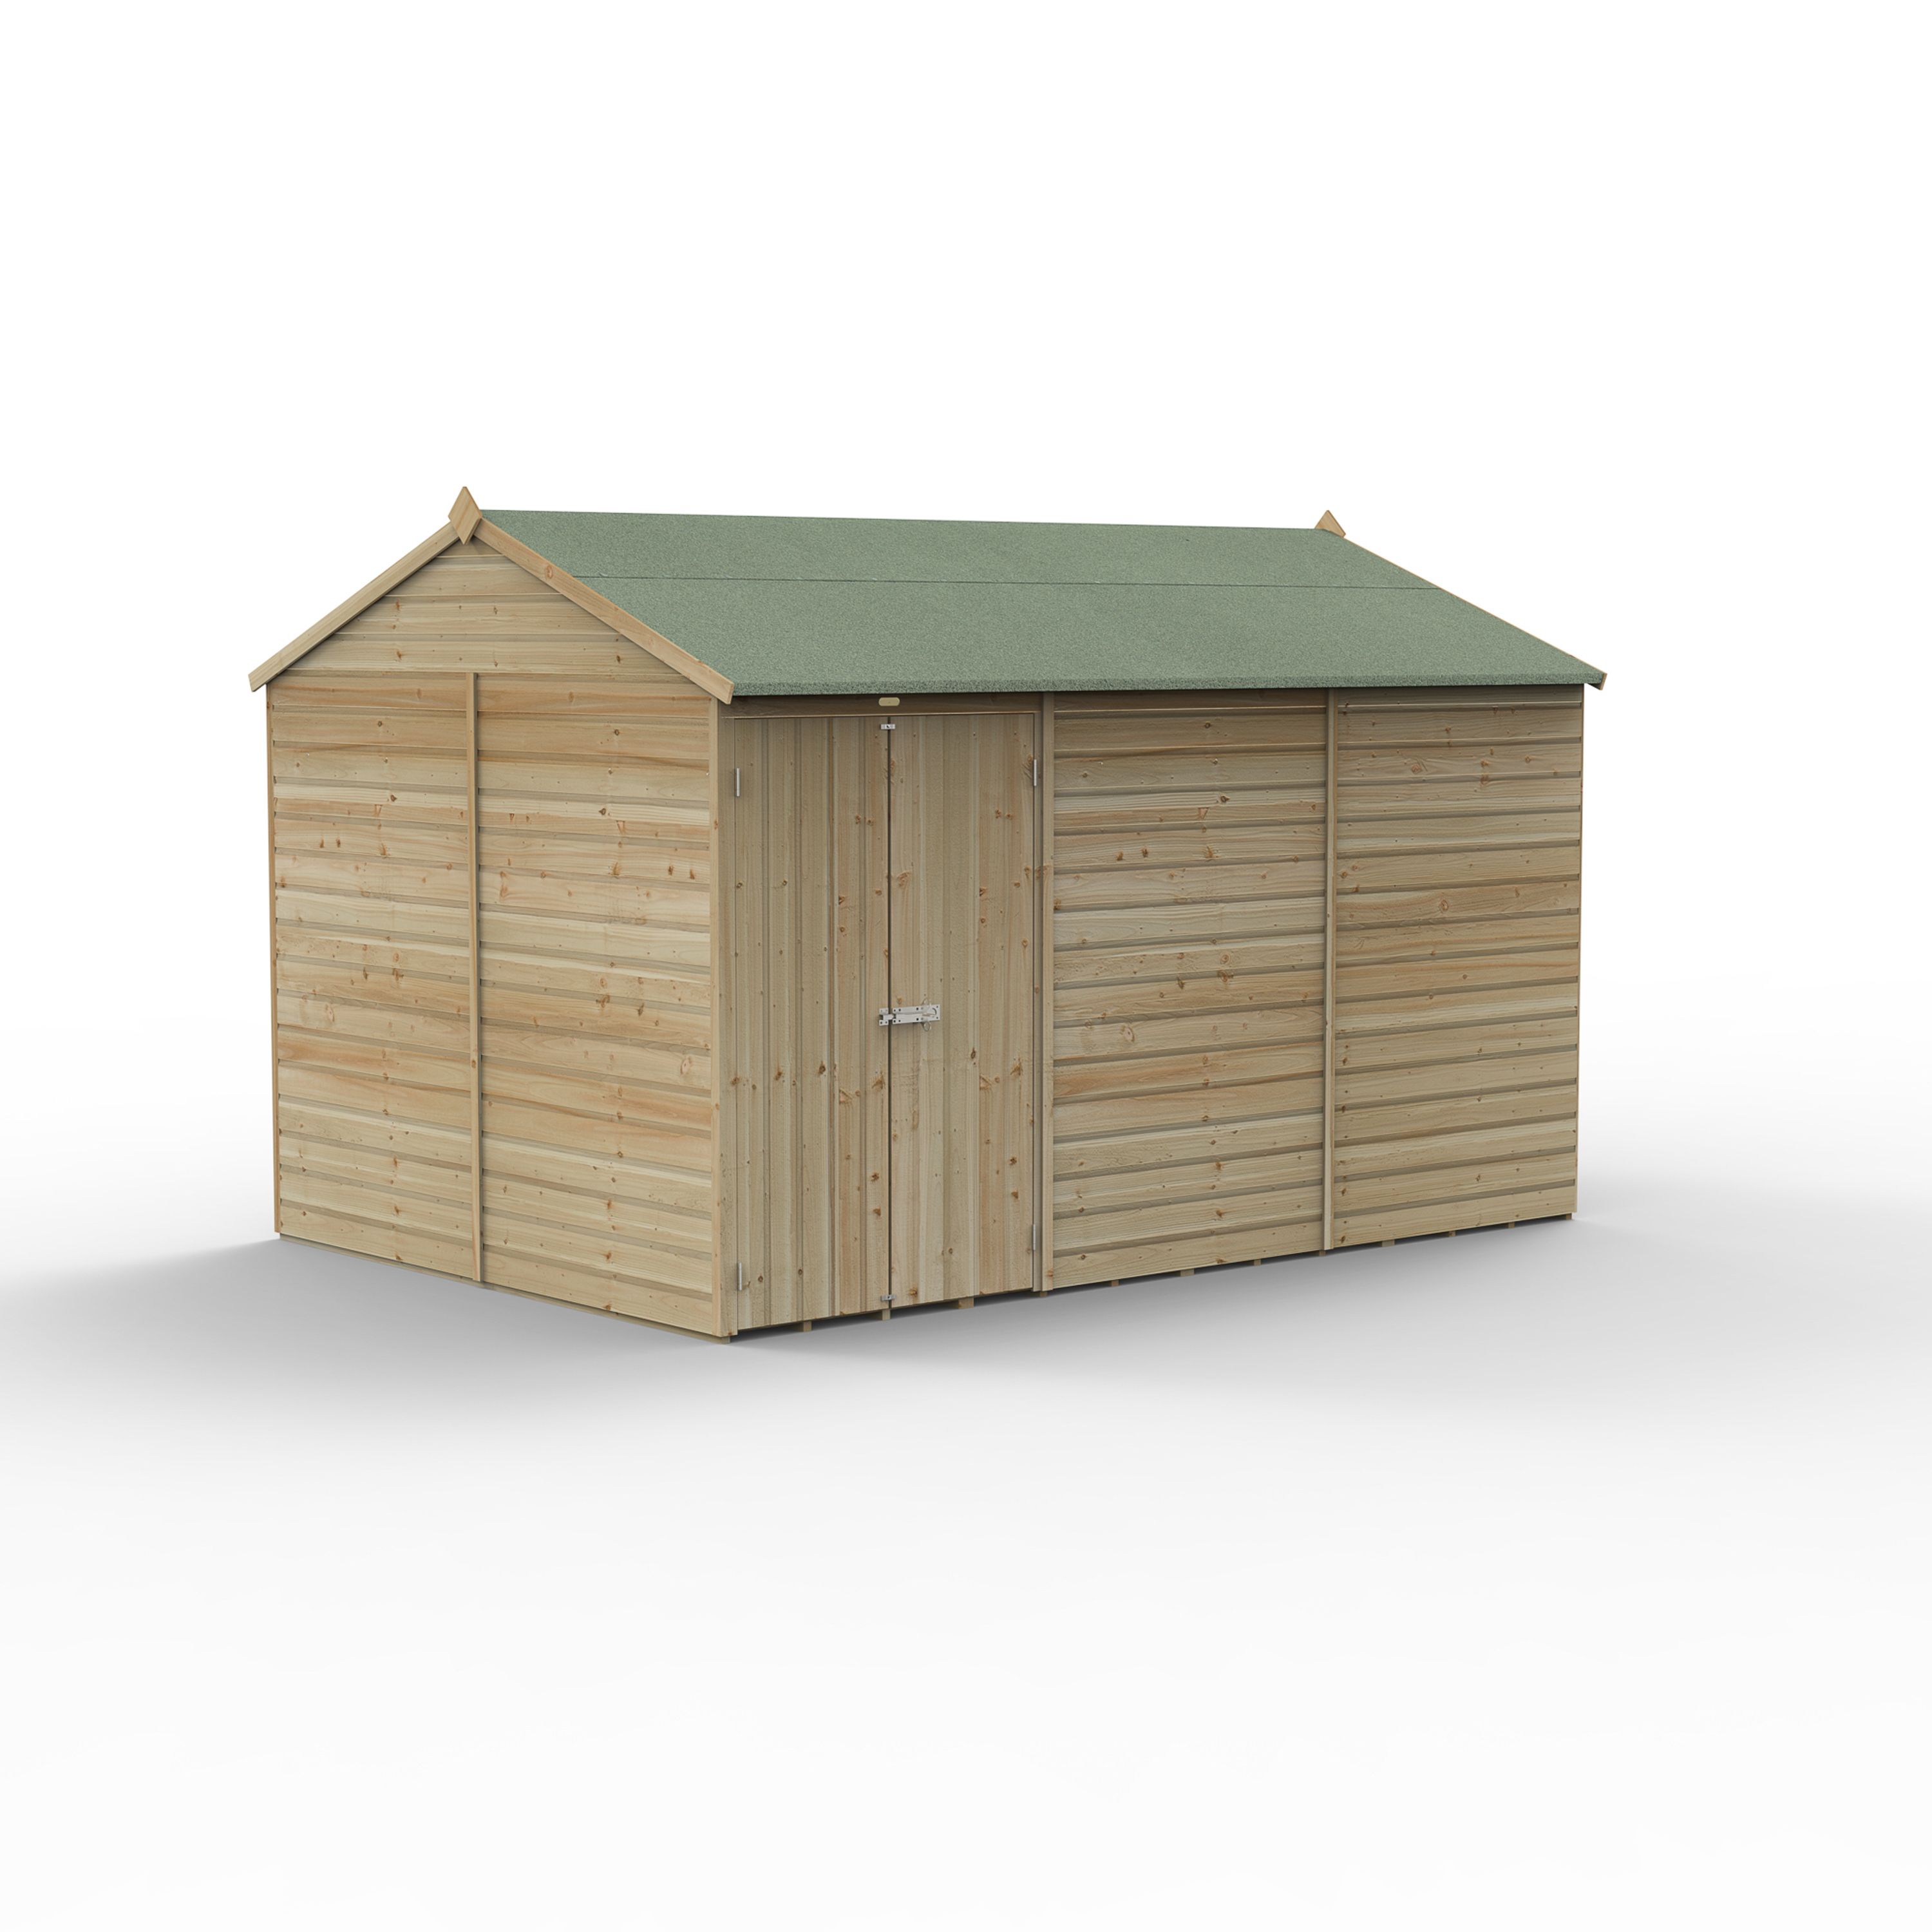 Forest Garden Beckwood 12x8 ft Reverse apex Natural timber Wooden 2 door Shed with floor (Base included) - Assembly not required